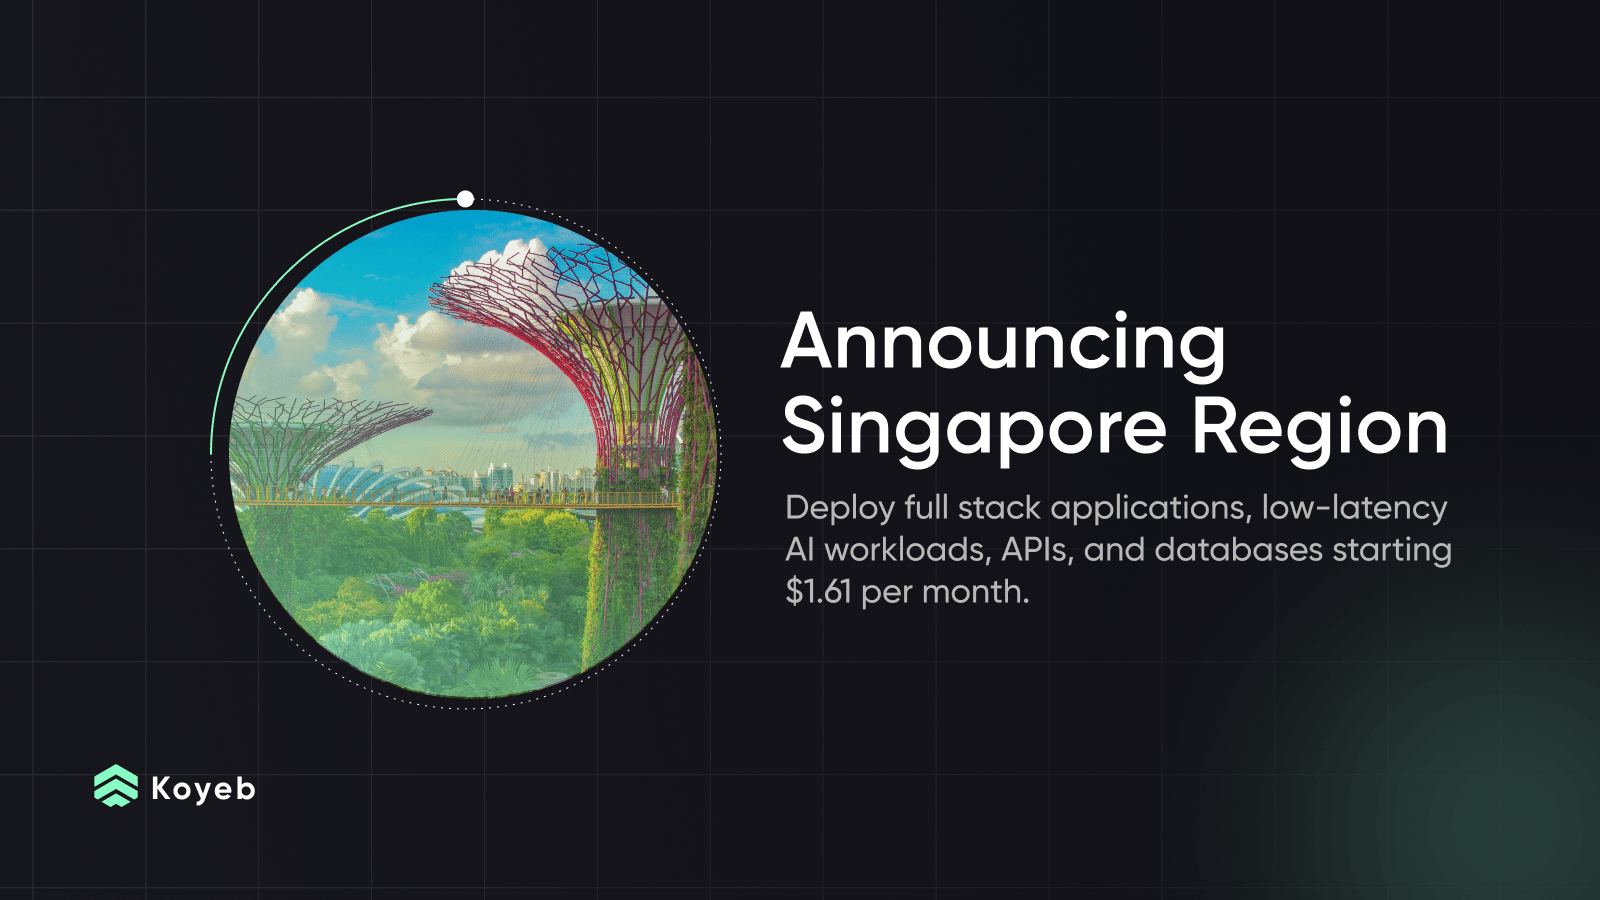 Today, we are thrilled to announce that our Singapore location is generally available to deploy your full stack applications, low-latency AI workloads